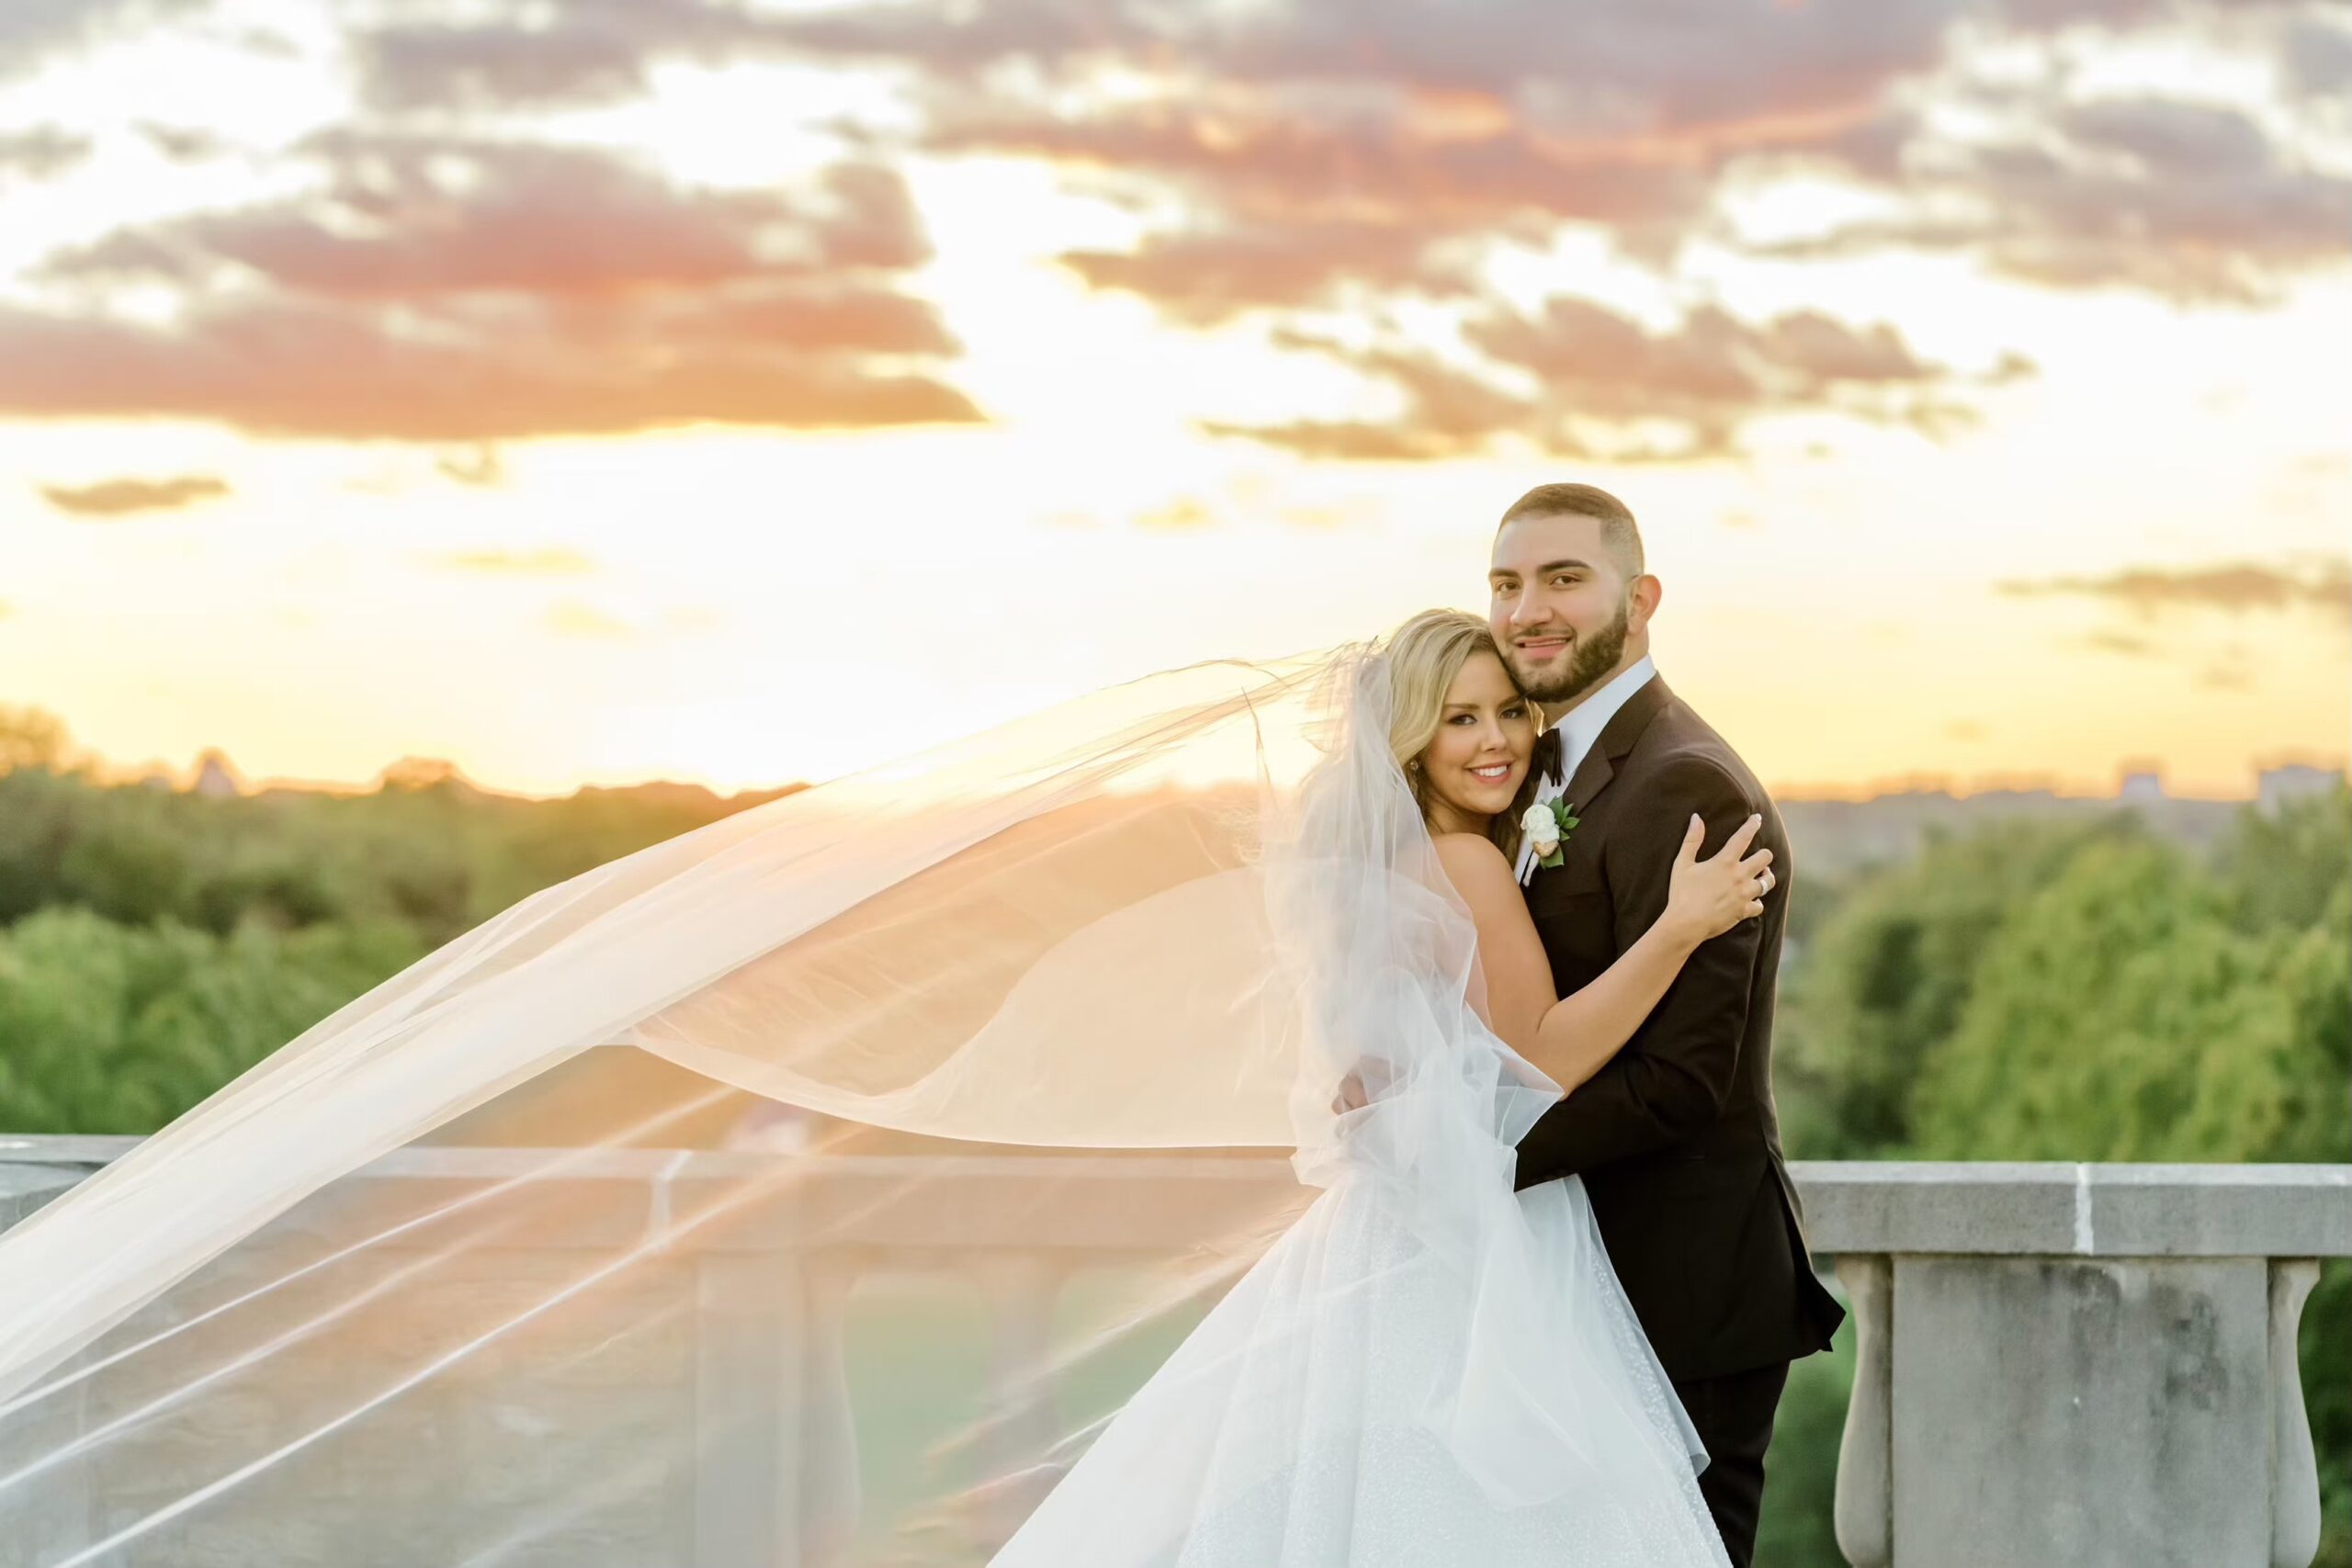 Bride and groom at sunset at Ault Park in Cincinnati